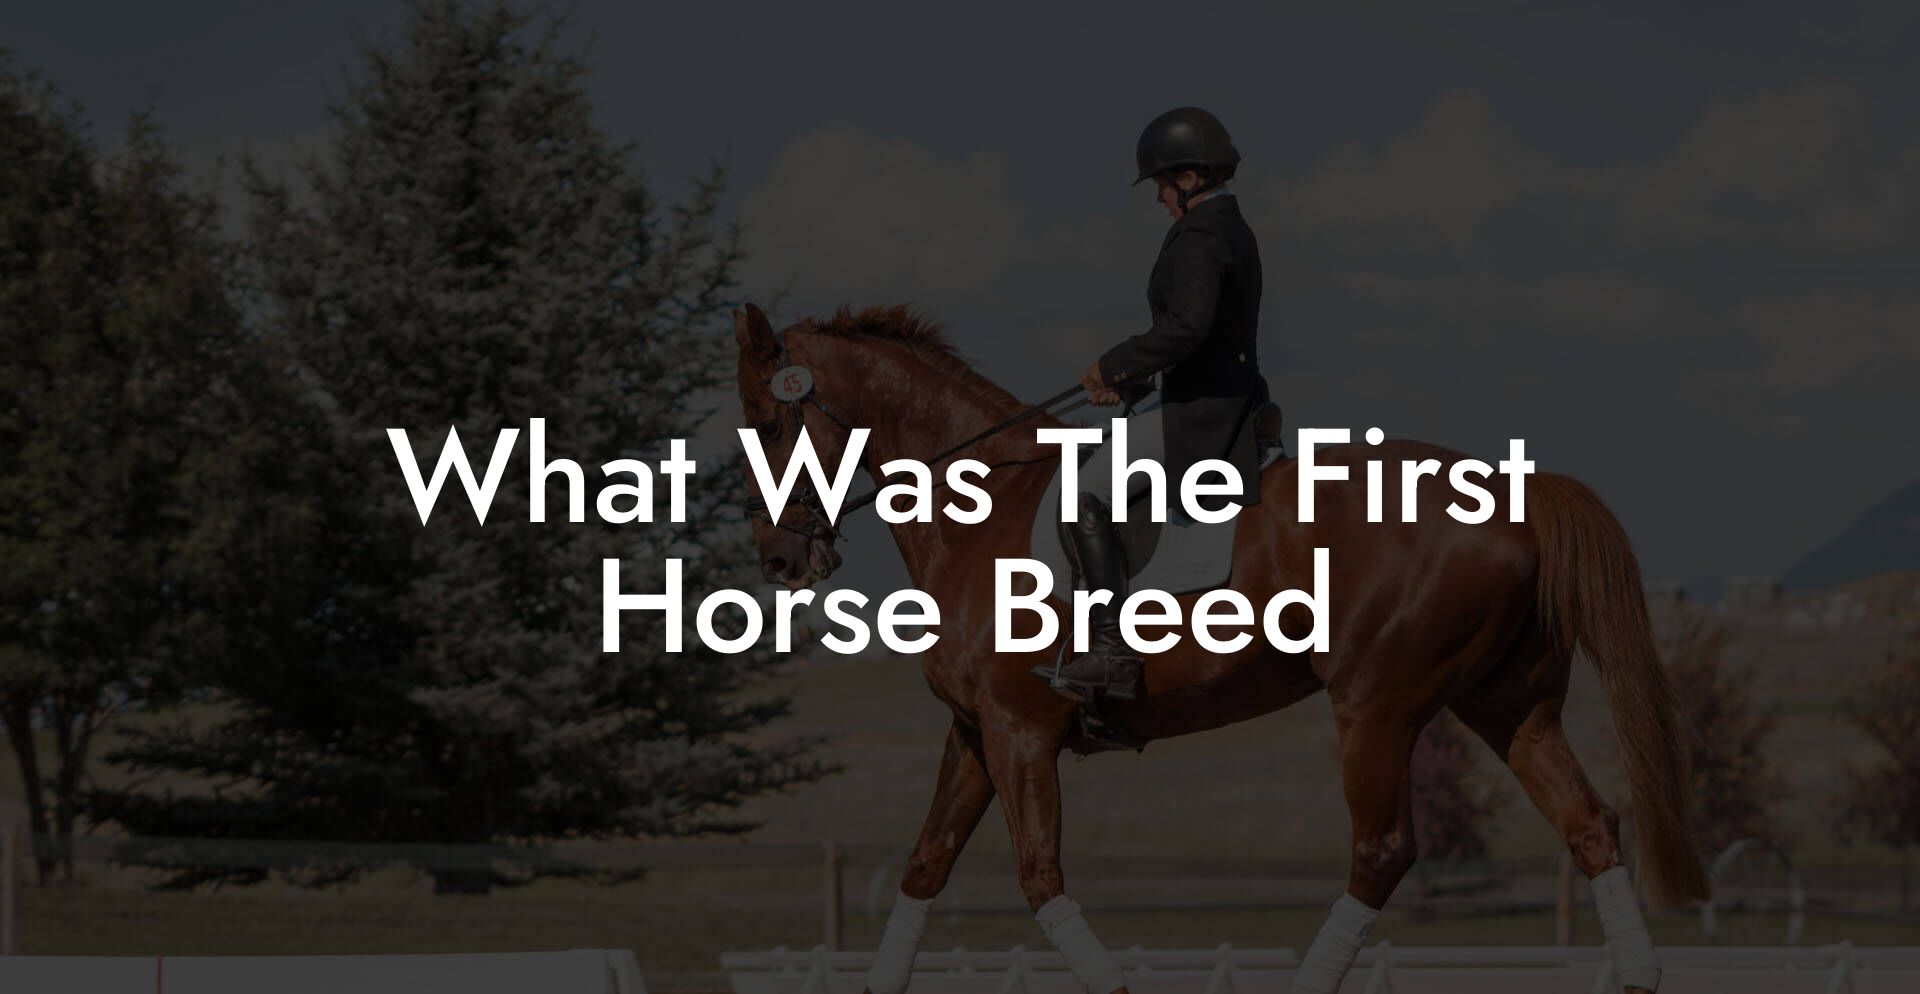 What Was The First Horse Breed